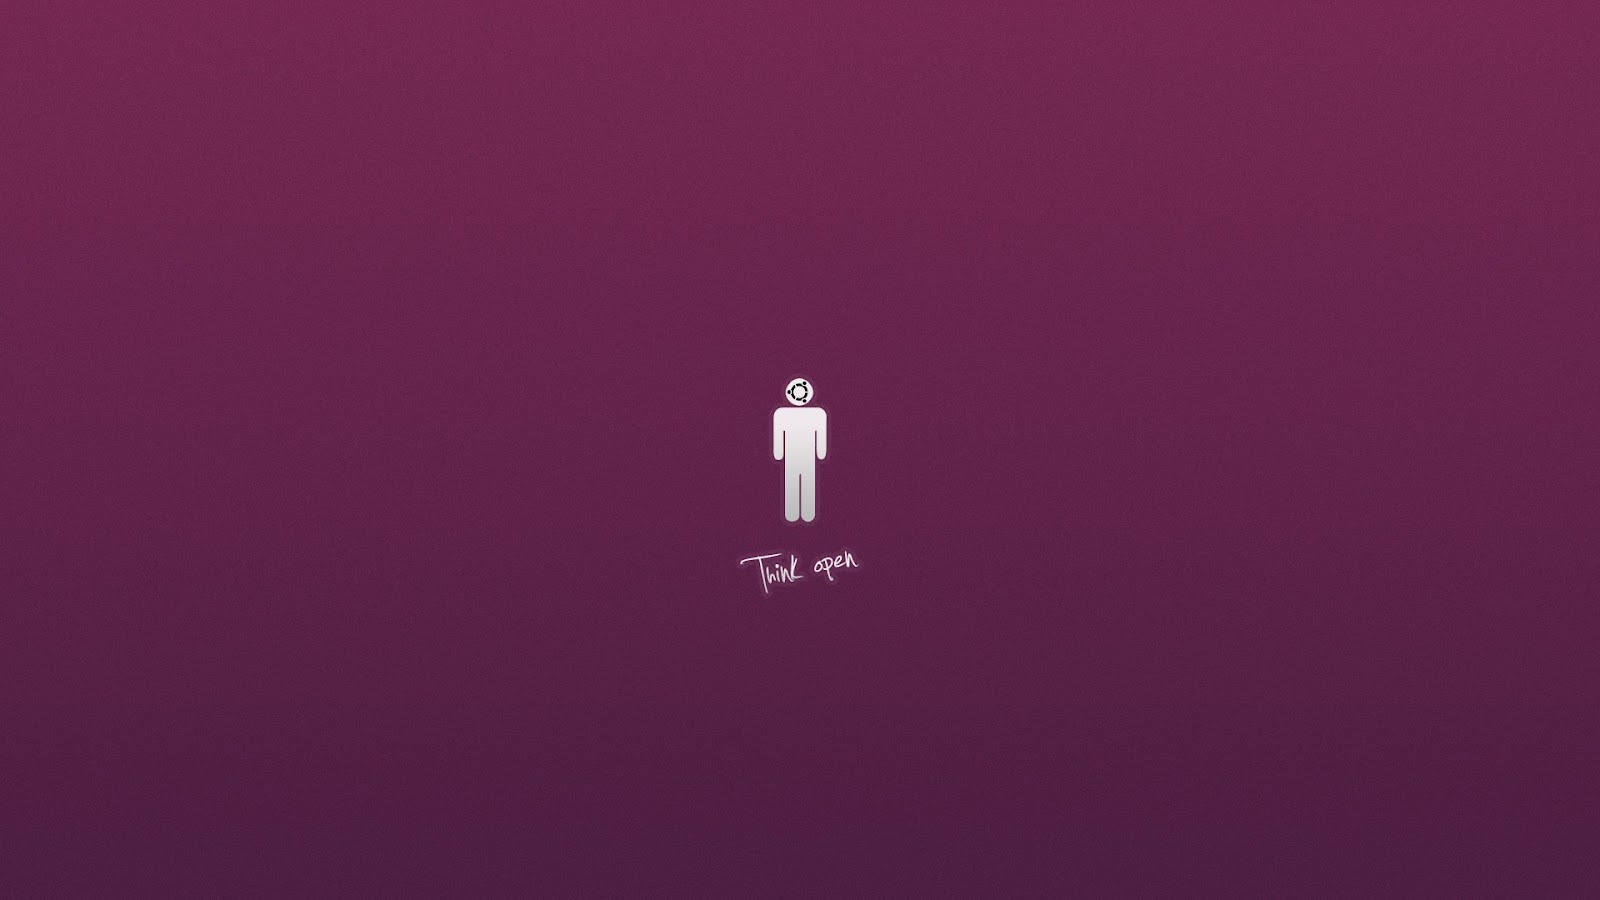 New Purple Linux Ubuntu Wallpaper Collection For Your